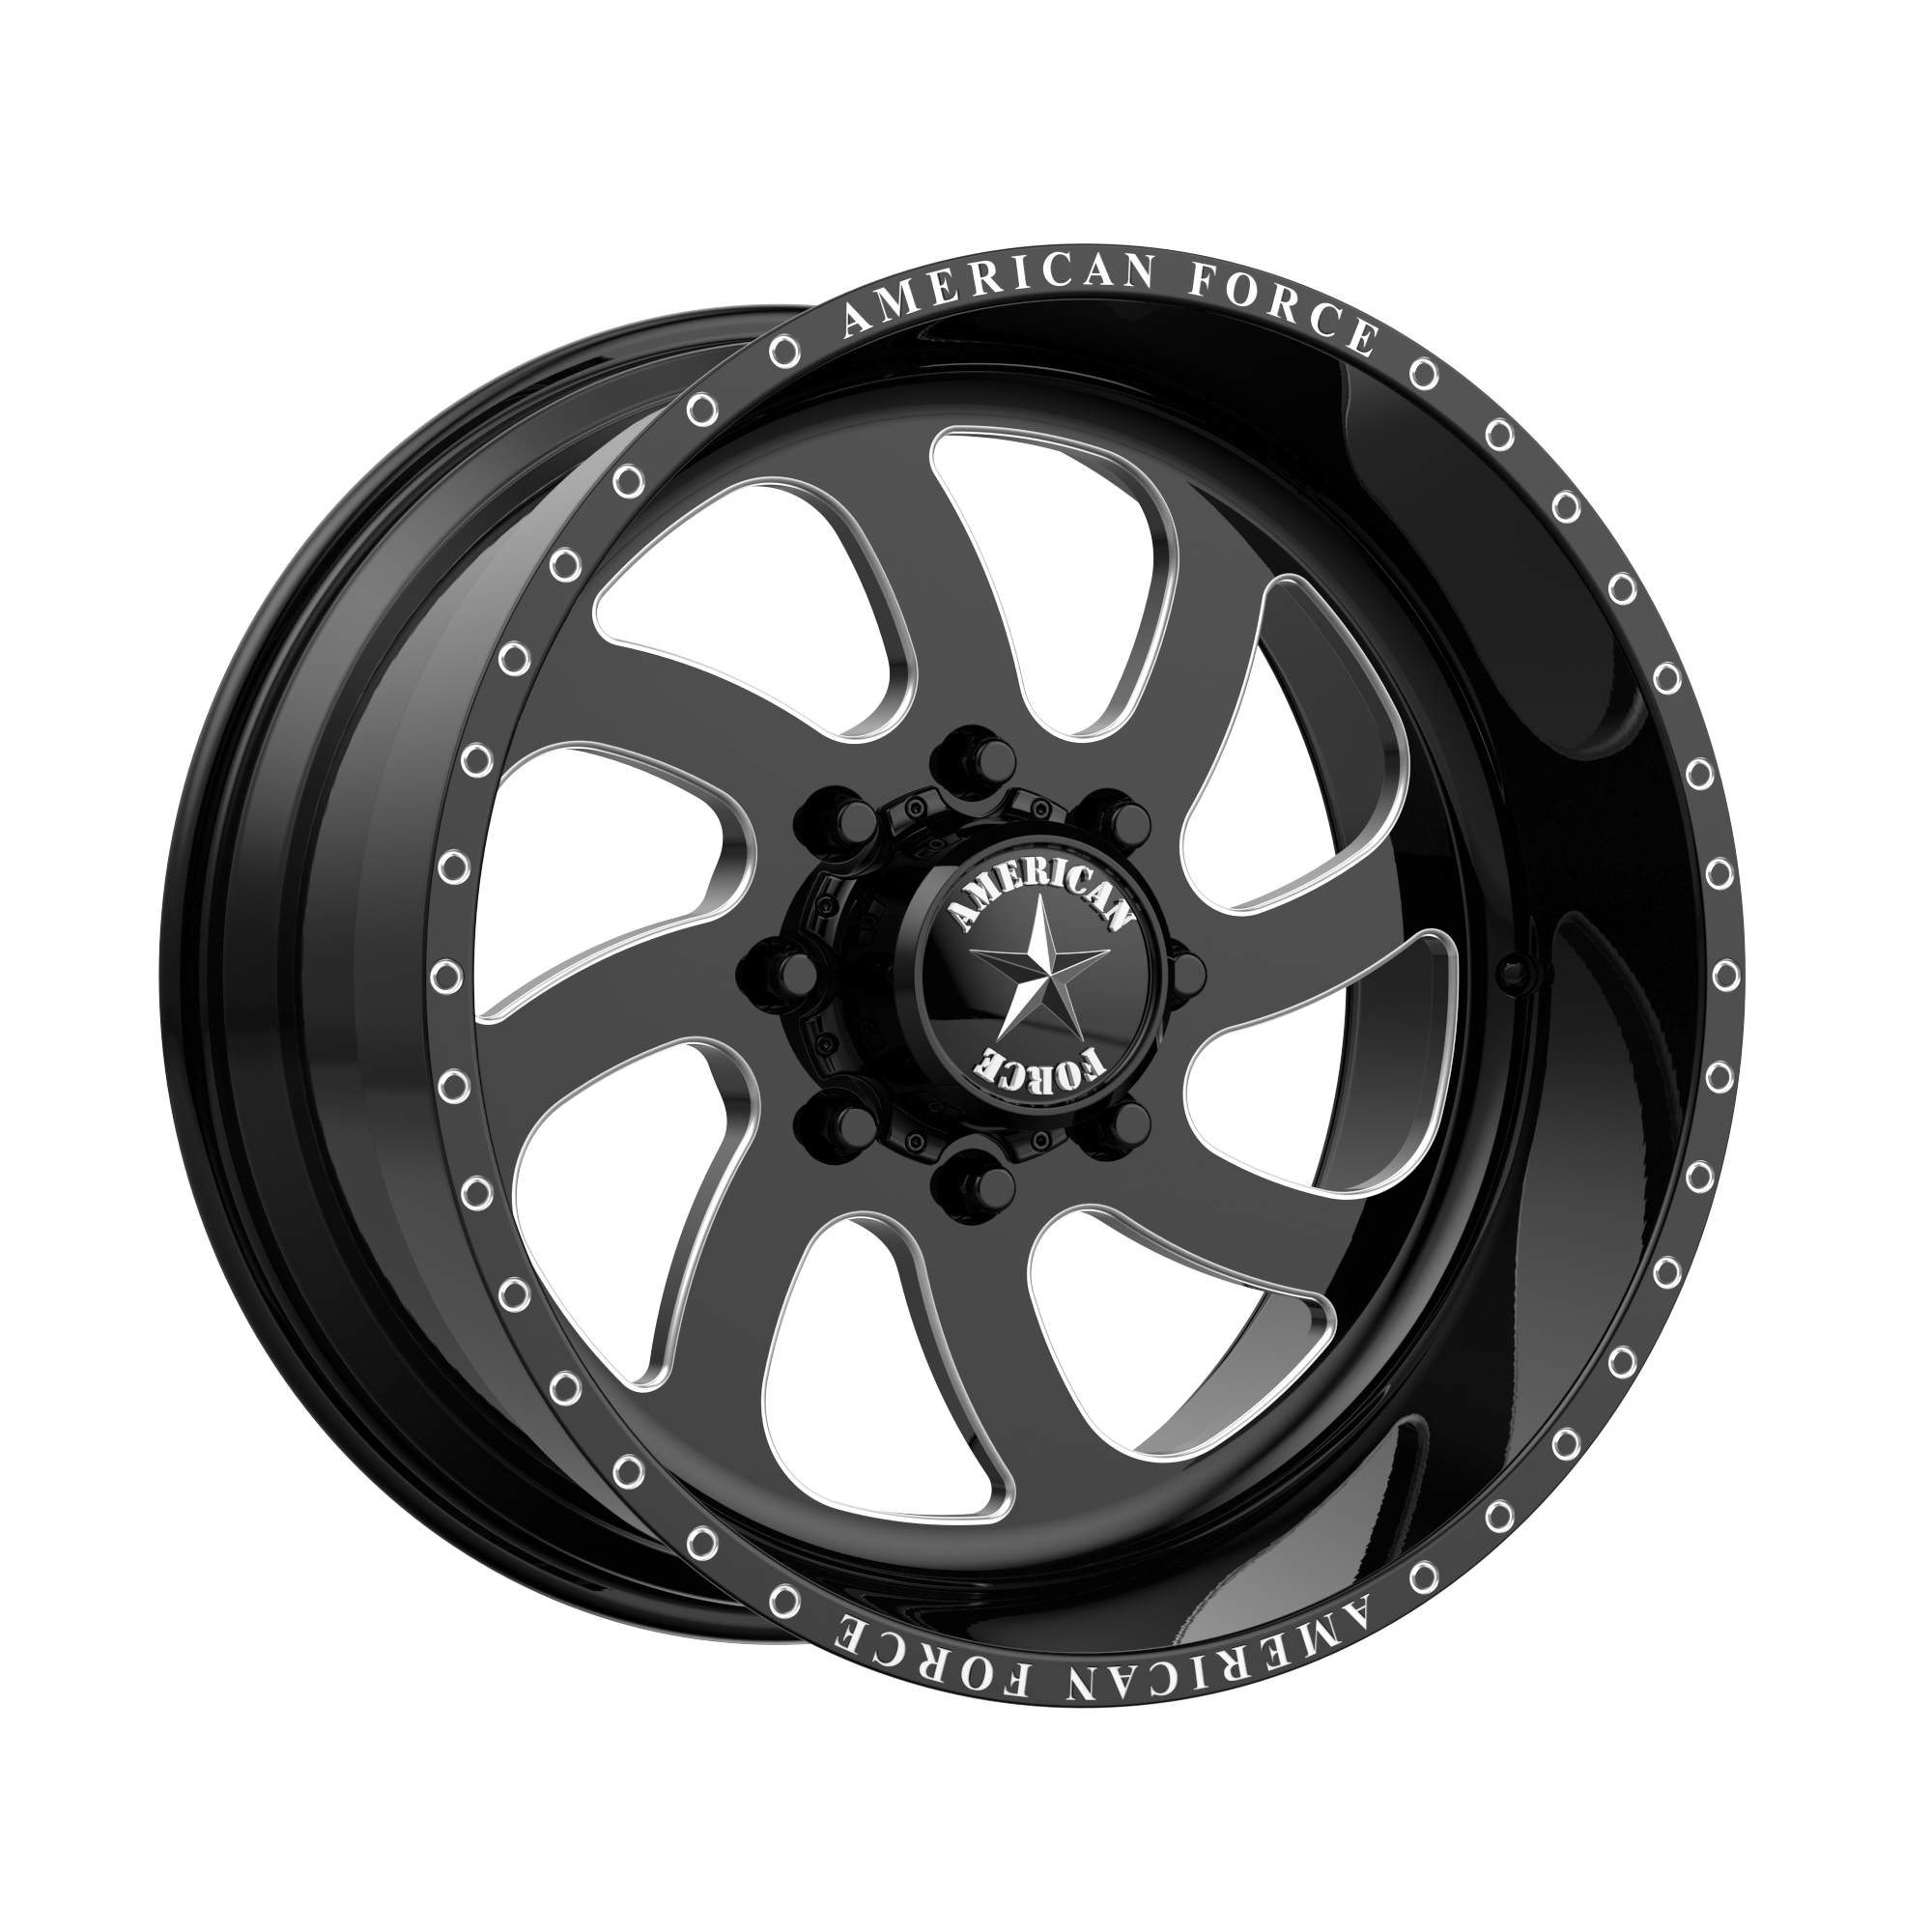 BLADE SS 20x14 8x165.10 GLOSS BLACK MACHINED (-73 mm) - Tires and Engine Performance